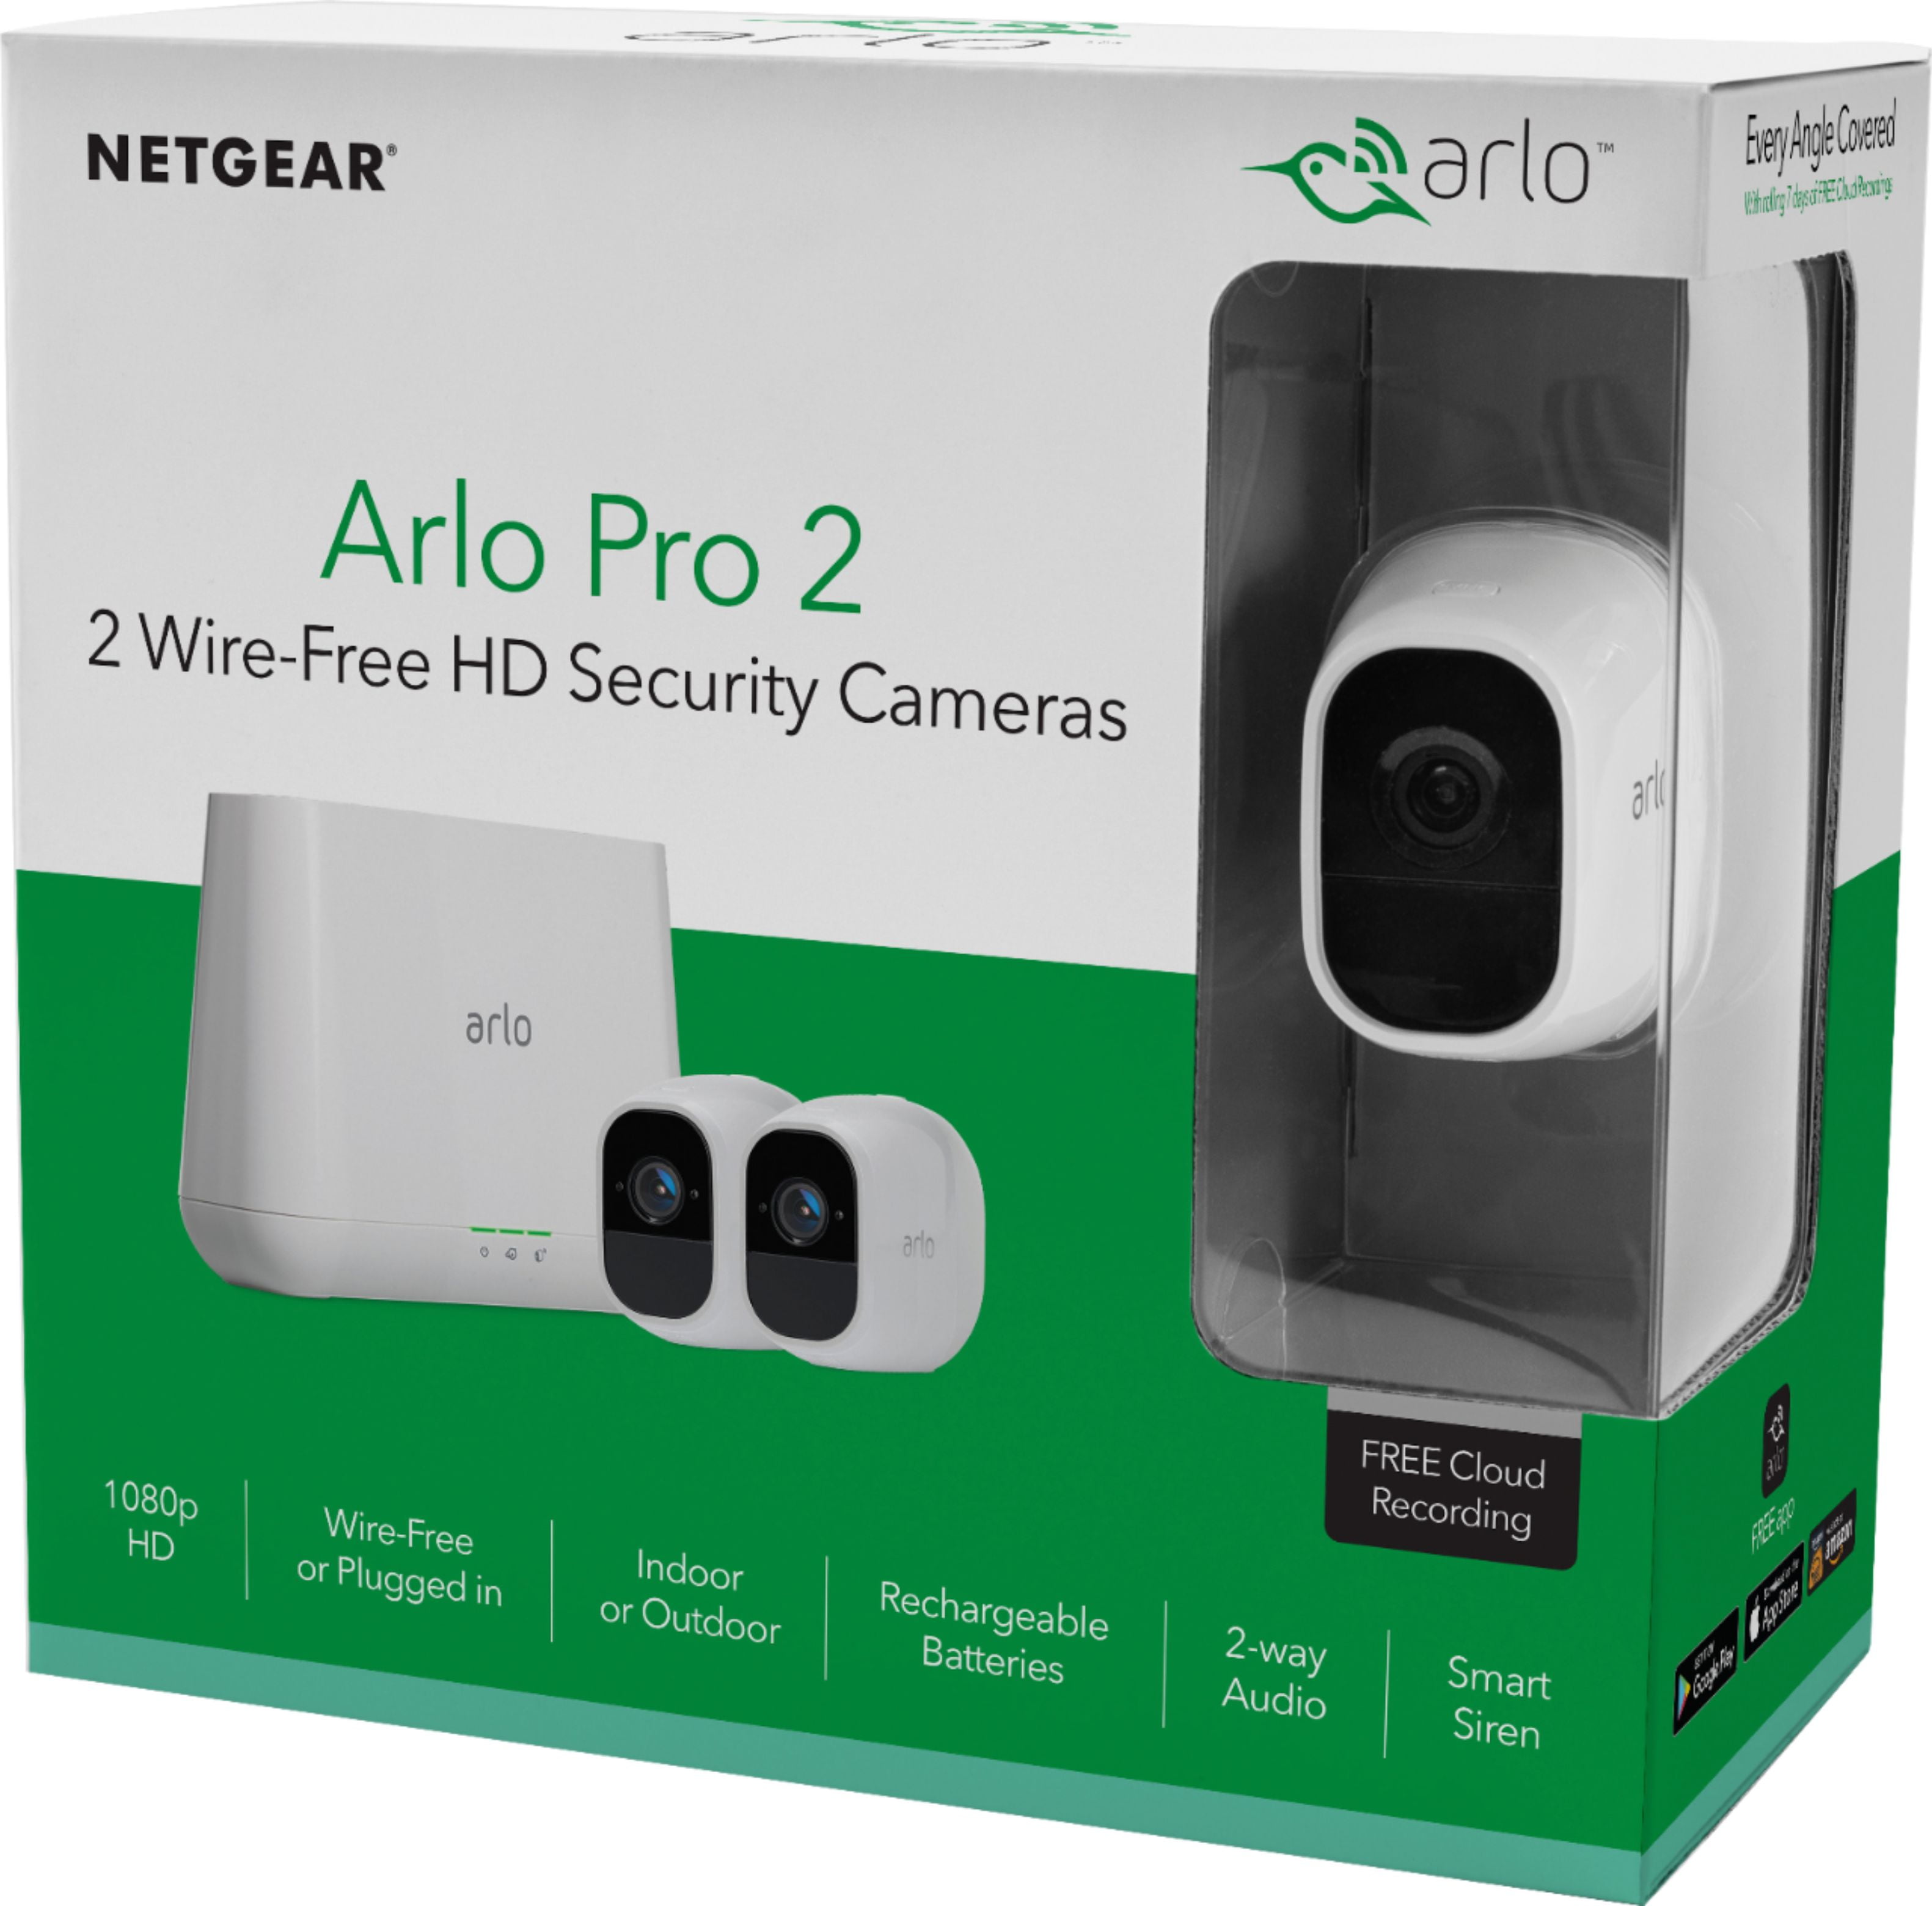 Arlo Pro 2 1080P HD Security Camera System VMS4230P - 2 Wire-Free Rechargeable Cameras with Audio, Indoor/Outdoor, Night Vision, Motion Detection, Activity Zones, 3-Second Look Back -